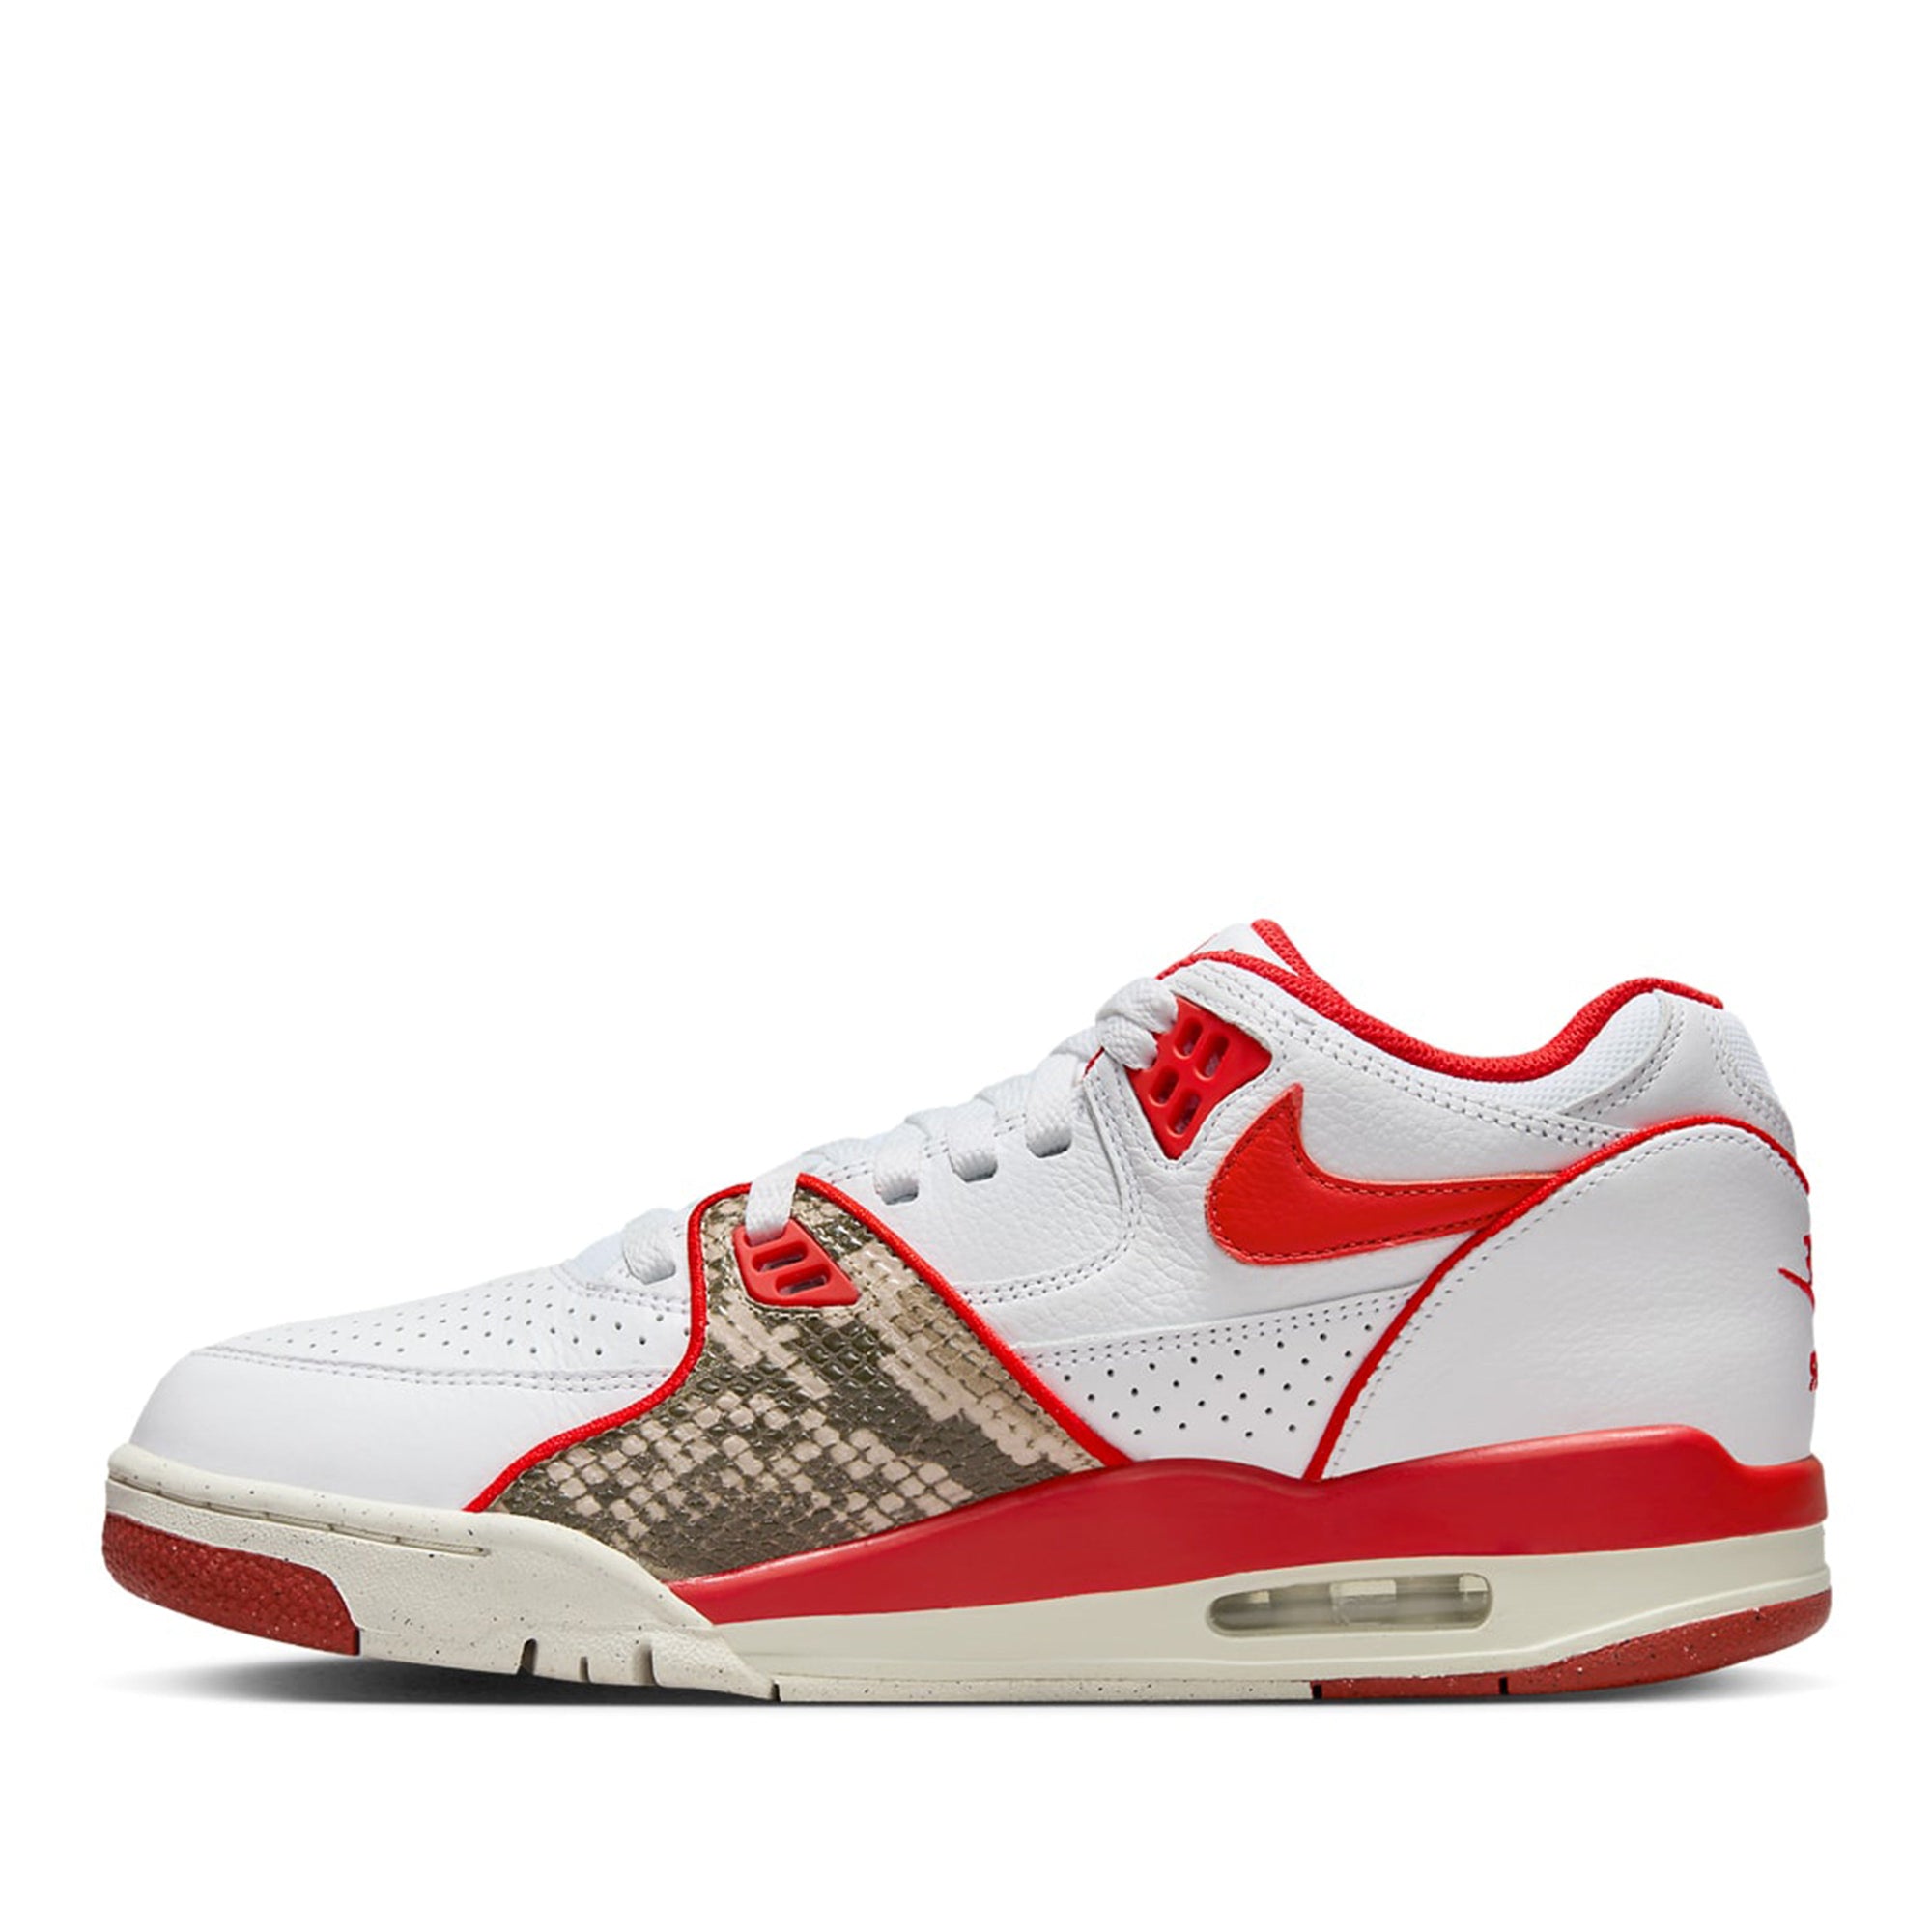 NIKE - Stüssy Men's Air Flight '89 Low SP - (White/Red) view 2